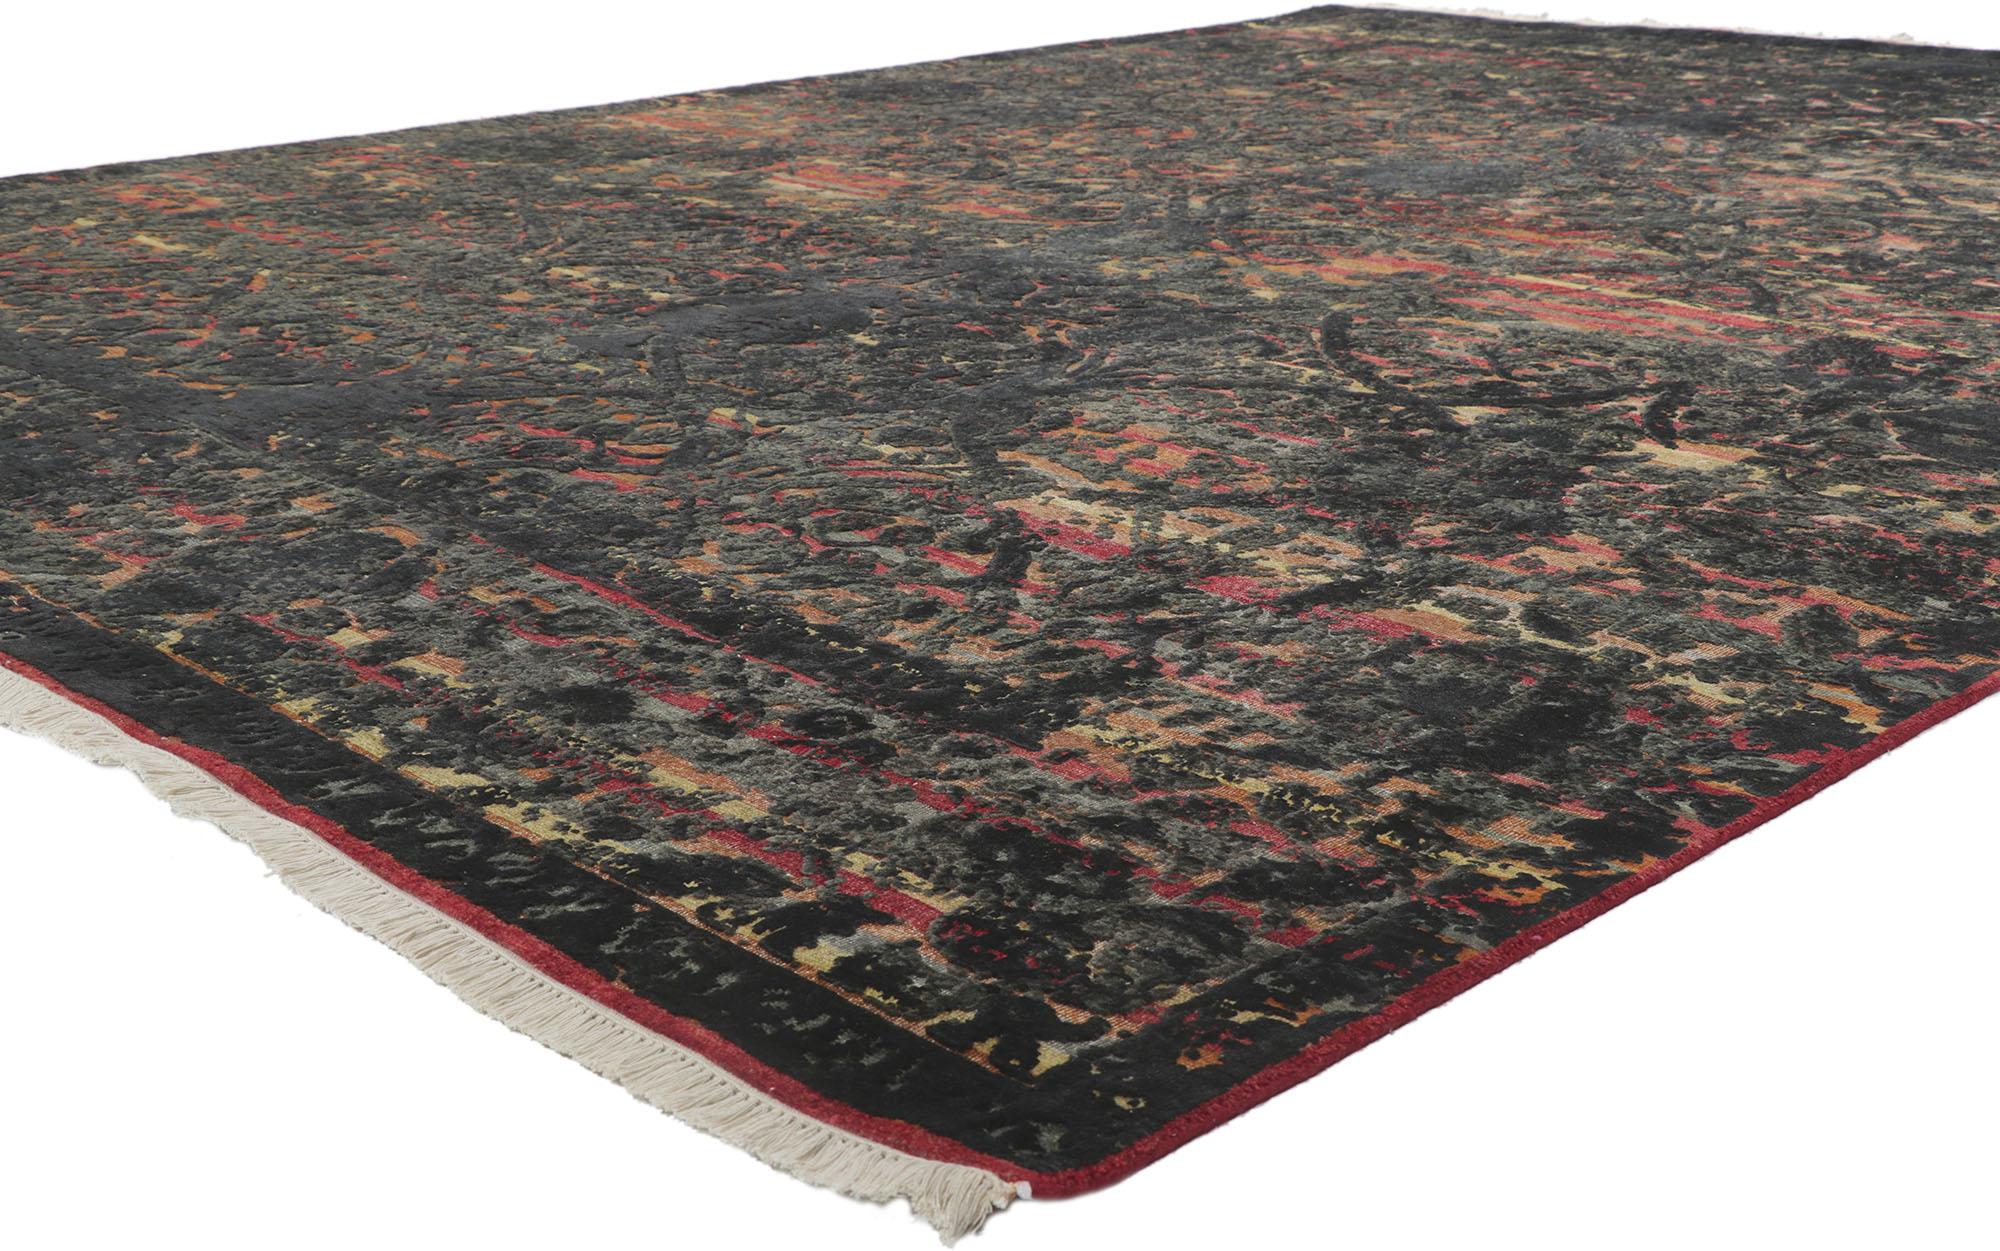 30710 new contemporary vintage style distressed high-low rug 09'00 x 12'00. Showcasing a modern style and raised design with incredible detail and texture, this hand knotted wool contemporary textured rug is a captivating vision of woven beauty. The